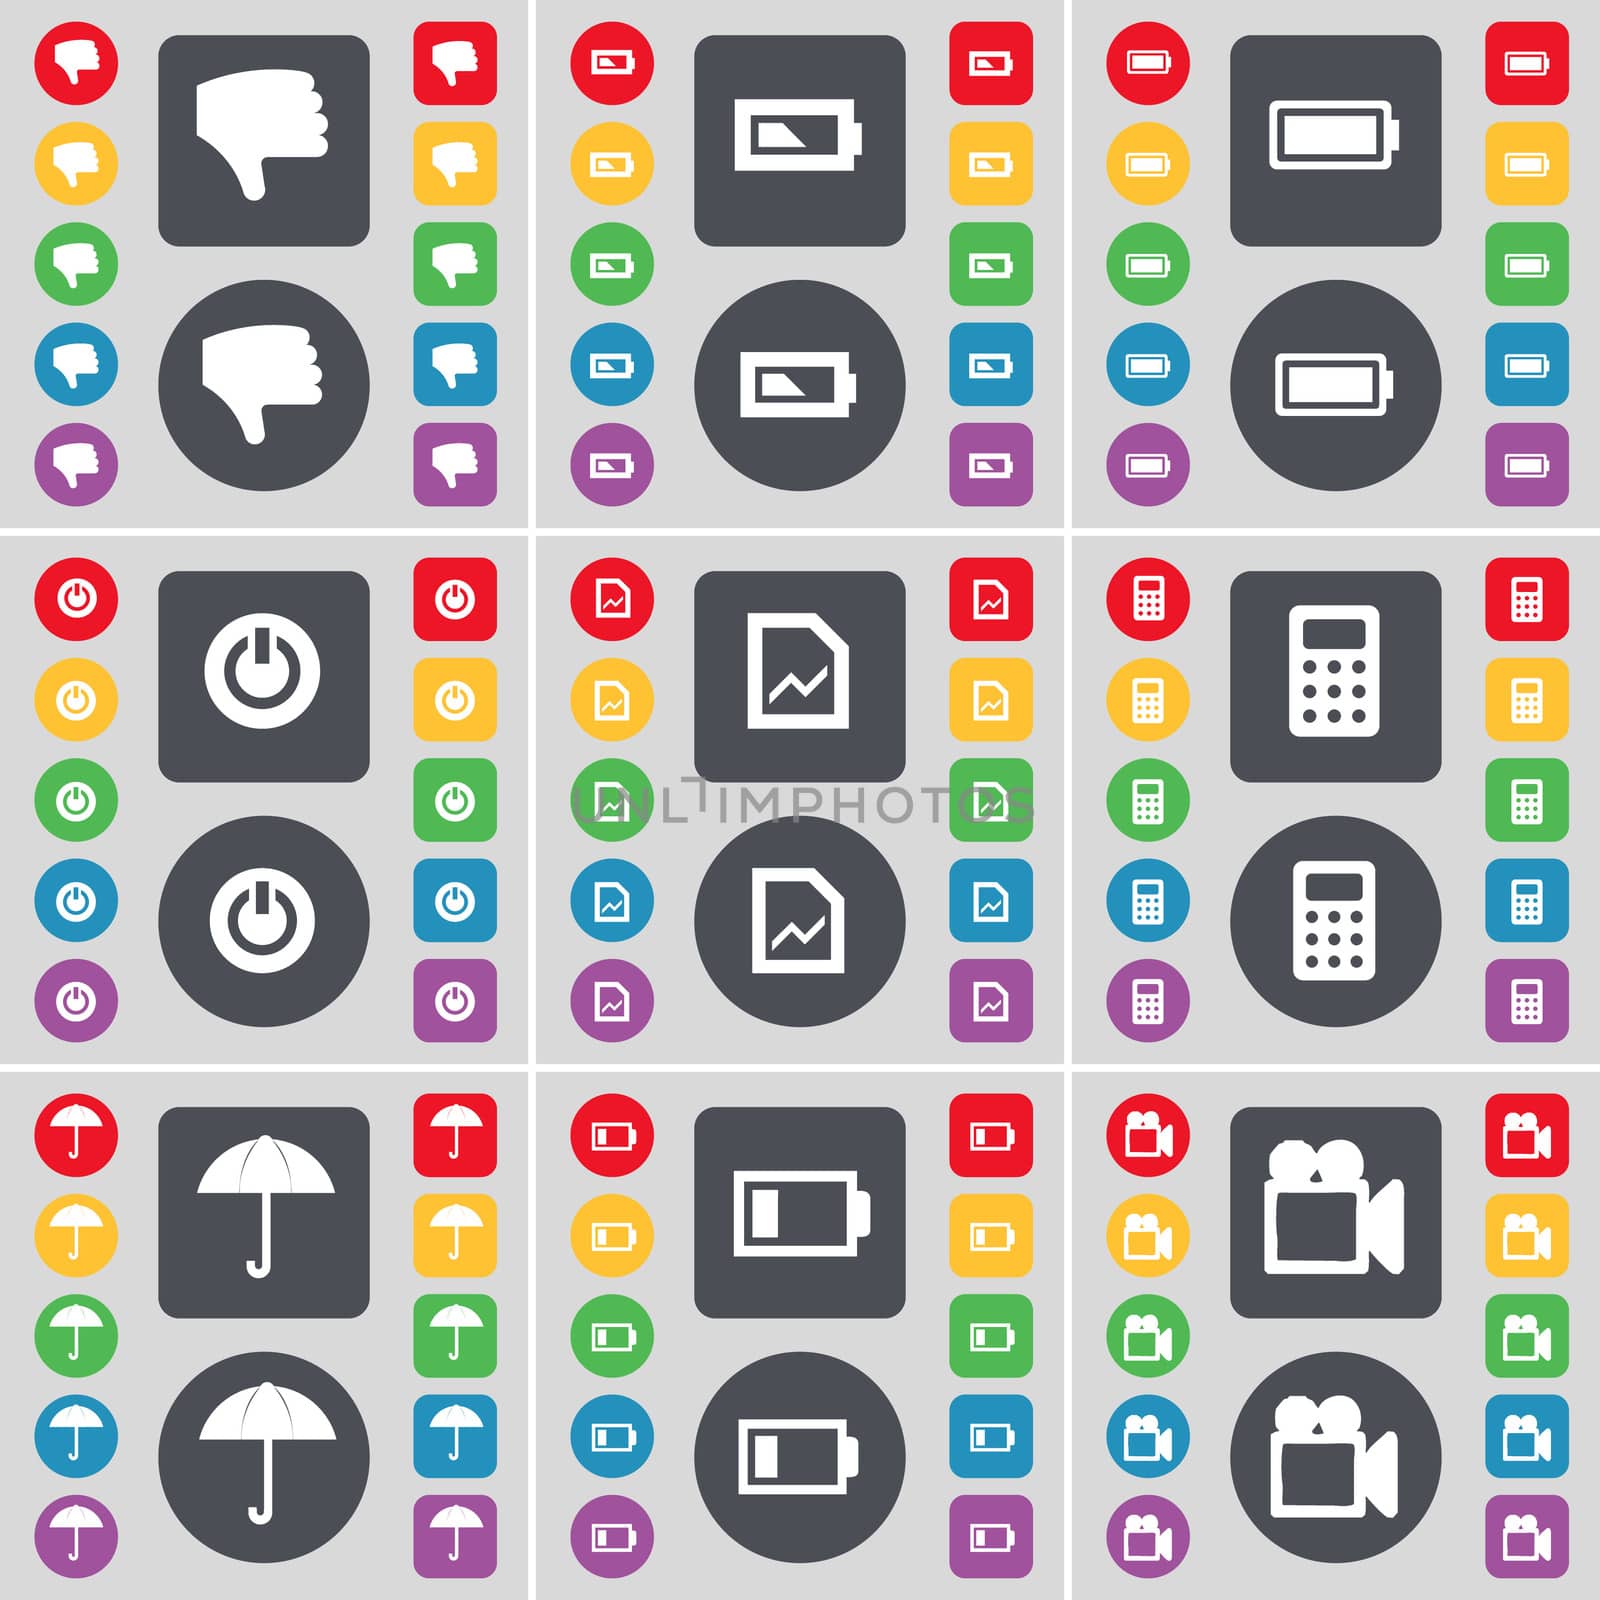 Dislike, Battery, Power, Graph file, Calculator, Umbrella, Battery, Film camera icon symbol. A large set of flat, colored buttons for your design. illustration